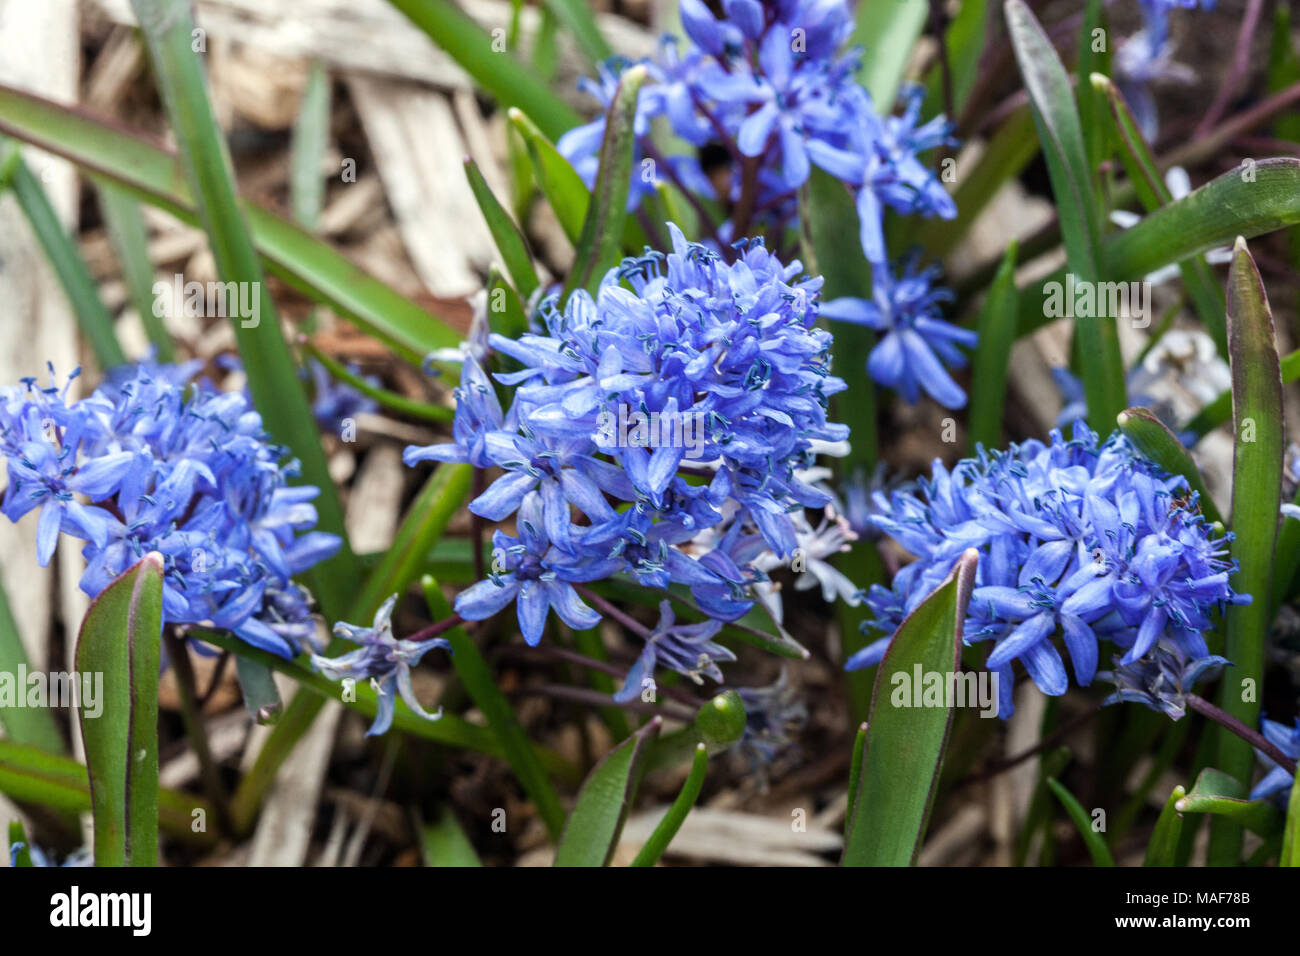 Alpine squill, Scilla bifolia, flowering bulbous plant in early spring Stock Photo